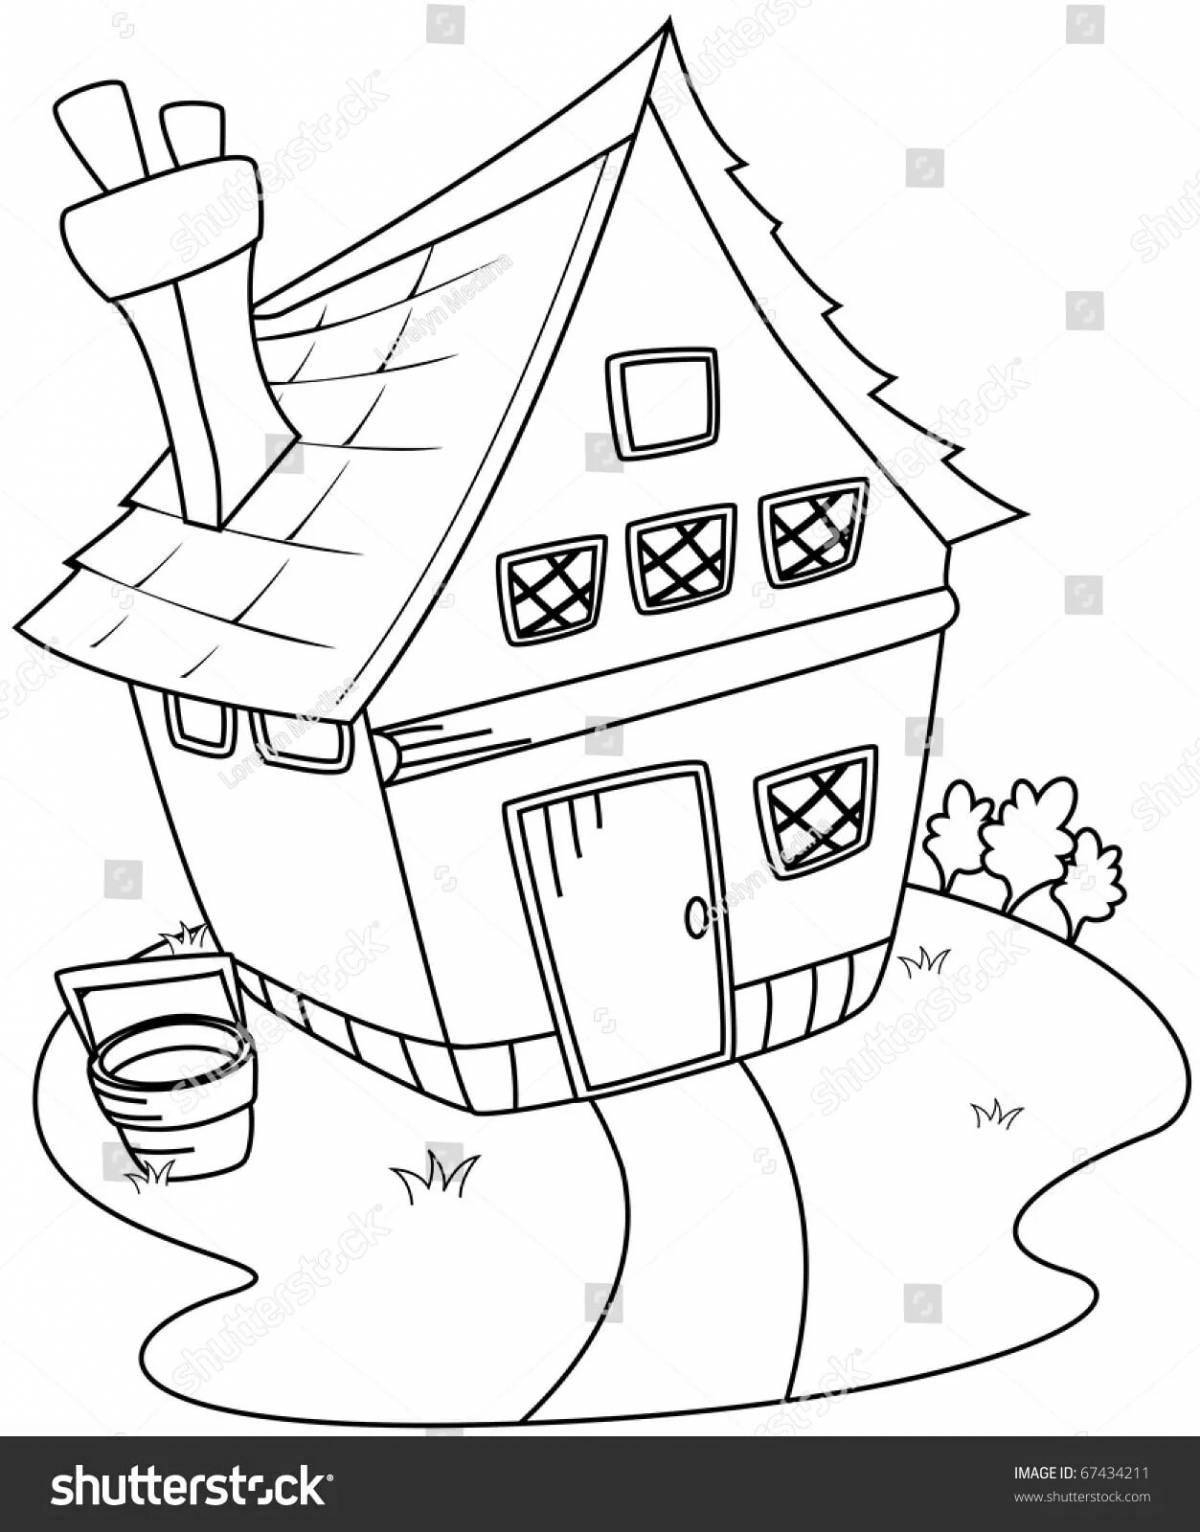 Coloring page funny cat house for kids